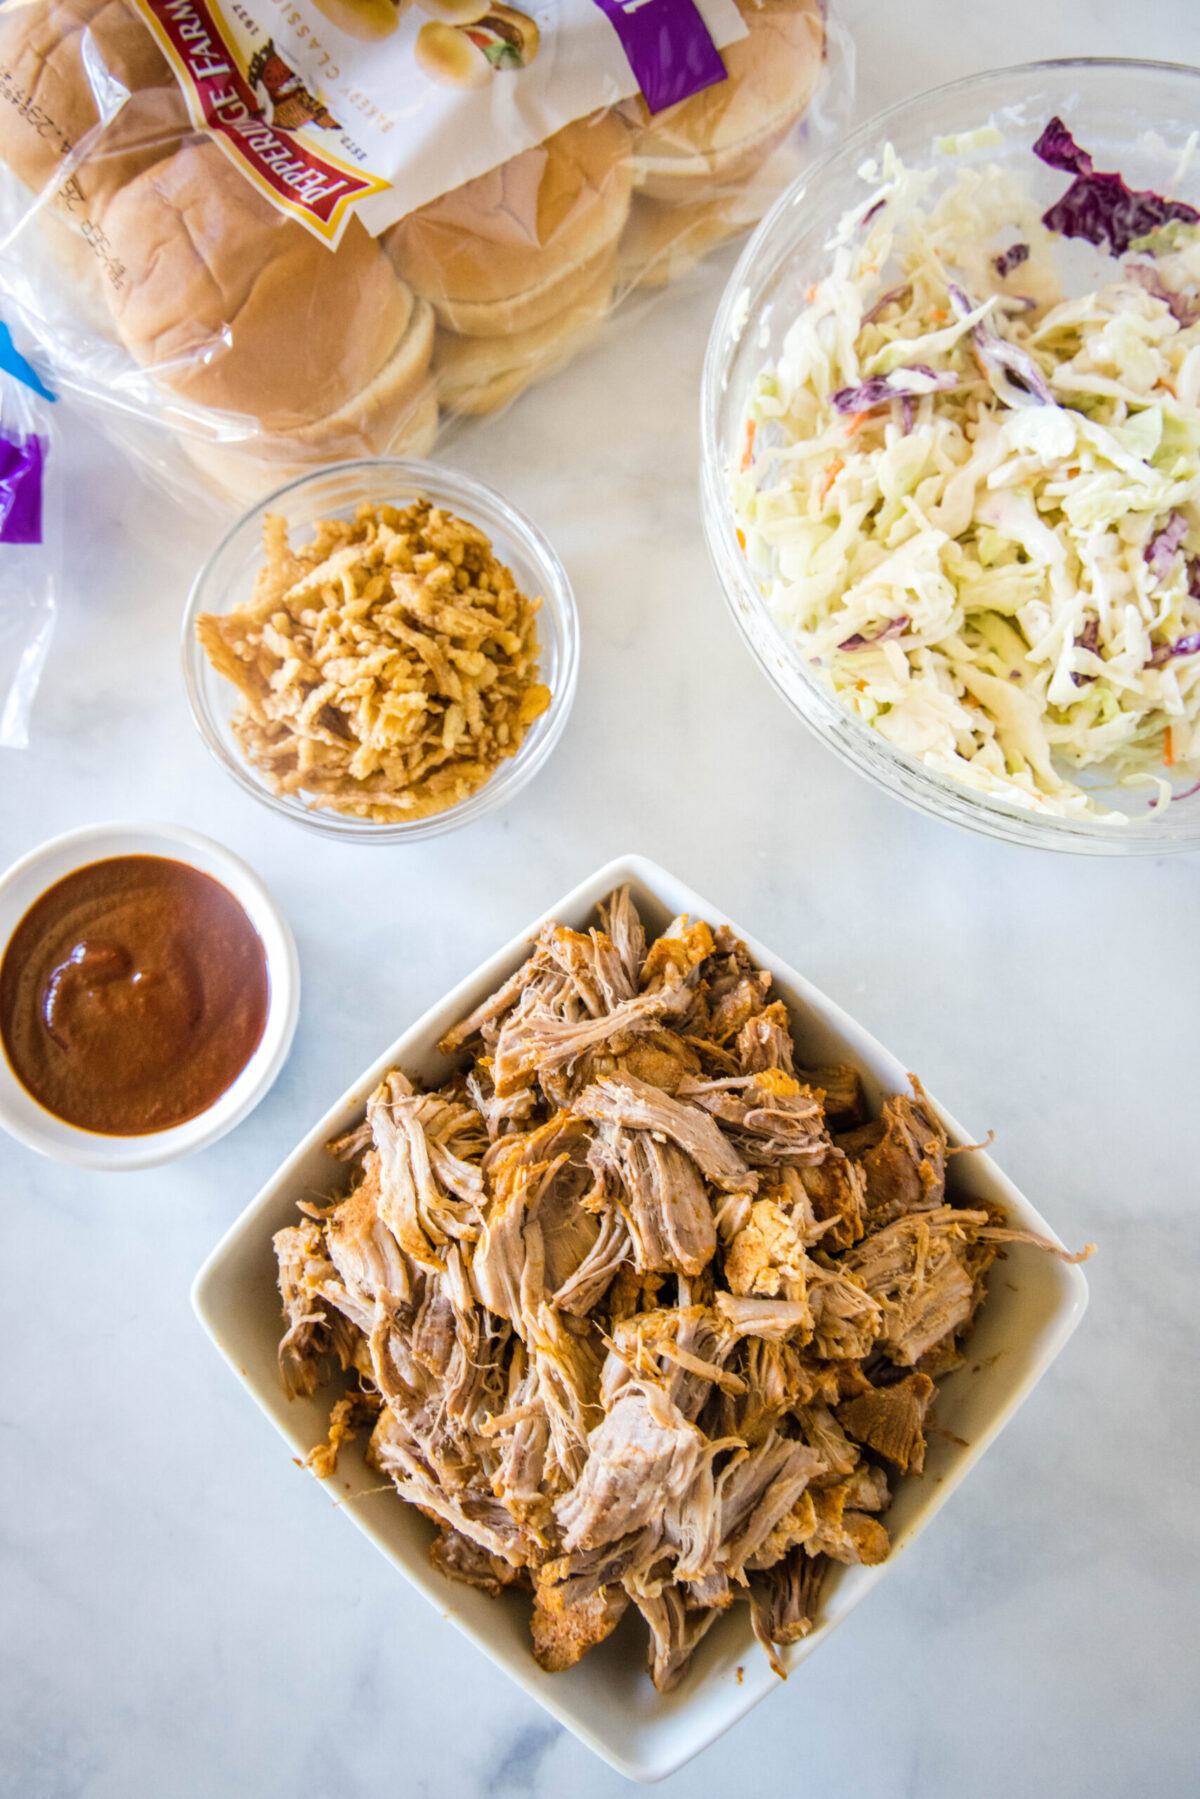 Overhead view of the ingredients needed for pulled pork sliders: a bowl of pulled pork, a bowl of coleslaw, a bowl of barbecue sauce, a bowl of fried onions, and a bag of slider buns.